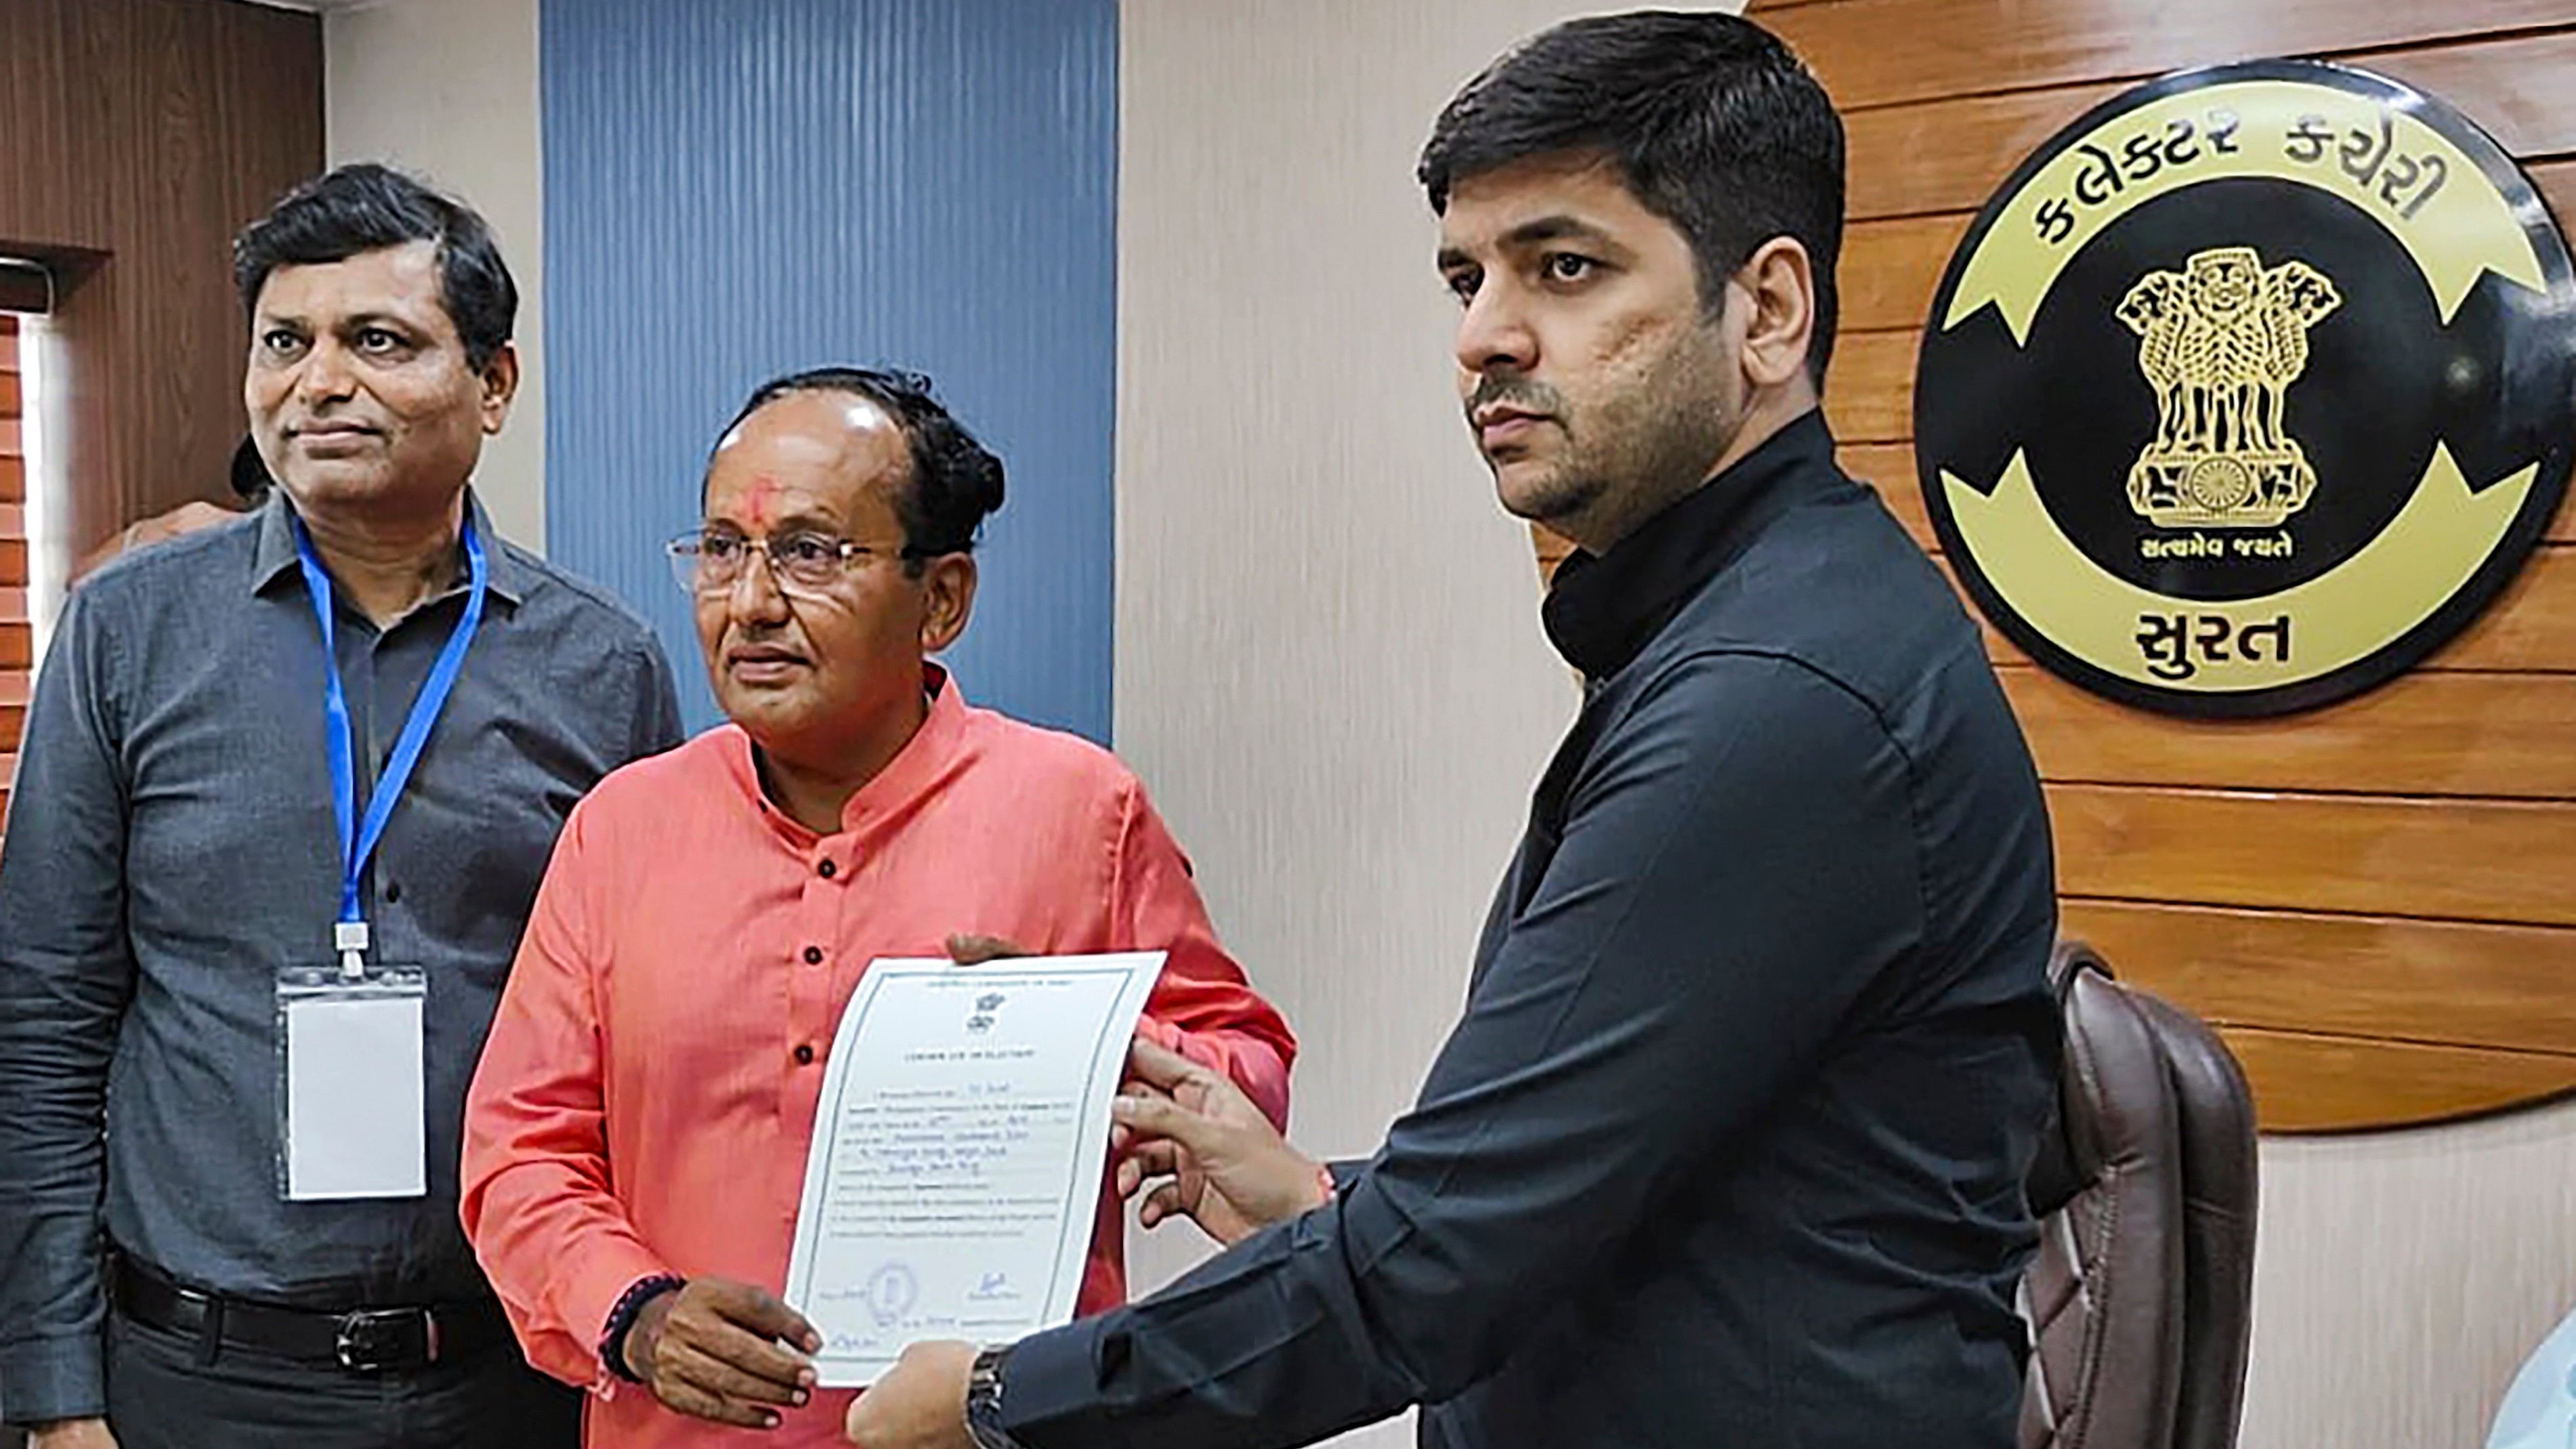 <div class="paragraphs"><p> BJP leader Mukesh Dalal receives the 'certificate of election' after he was elected unopposed from Surat Lok Sabha seat.</p></div>